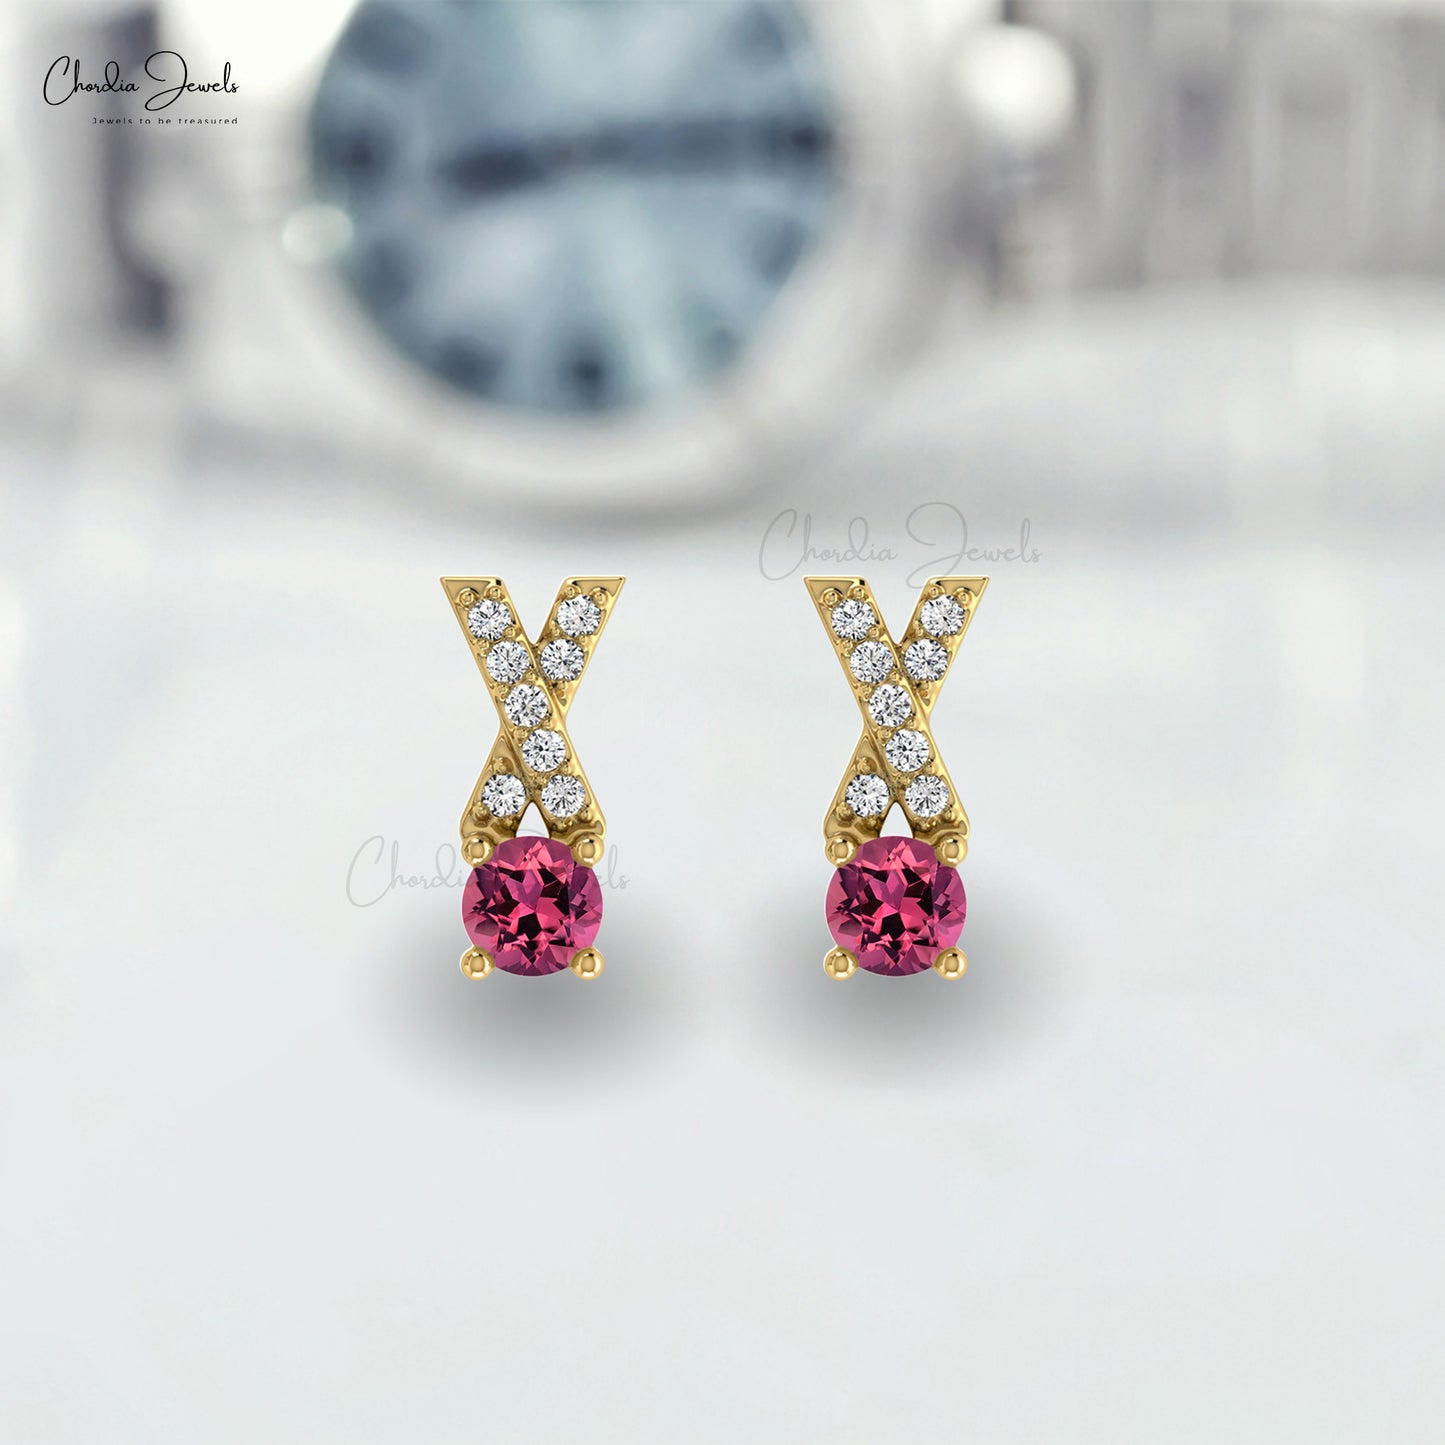 AAA Qaulity Pink Tourmaline Studs Earring In 14k Solid Gold With White Diamond Criss Cross Earring 5mm Round Cut Handmade Gemstone Earring For Women's